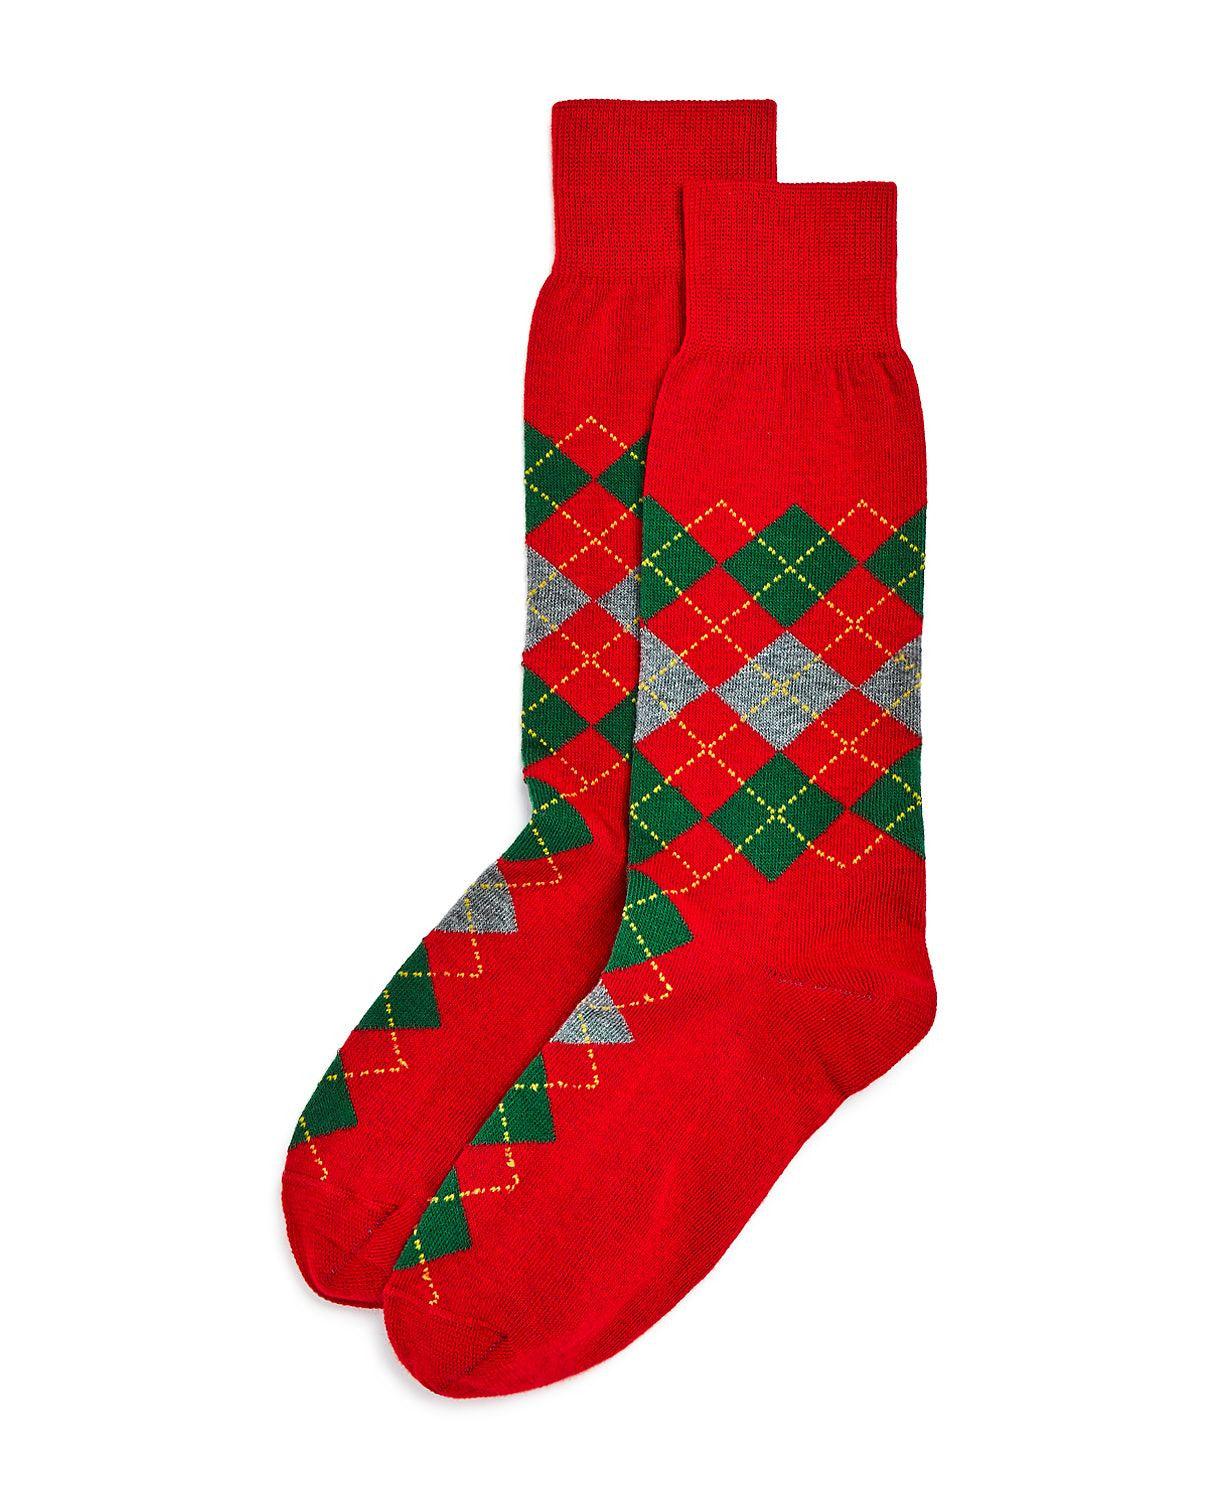 The Men's Store Holiday Argyle Socks Fire Red